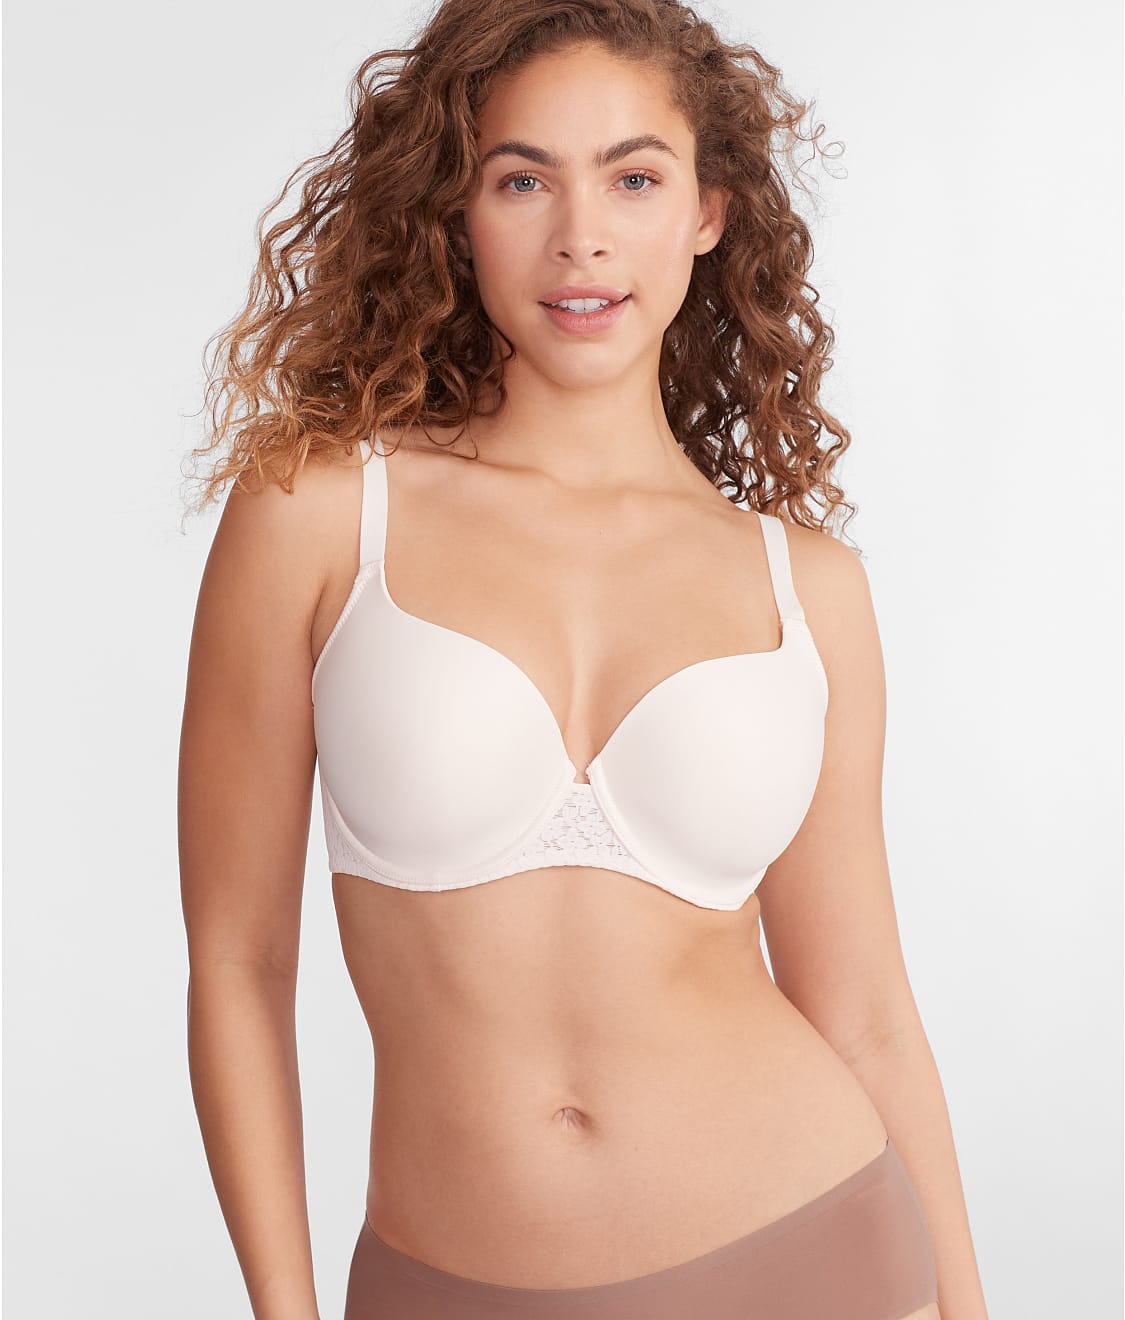 Average Size Figure Types in 34F Bra Size FF Cup Sizes Bare by